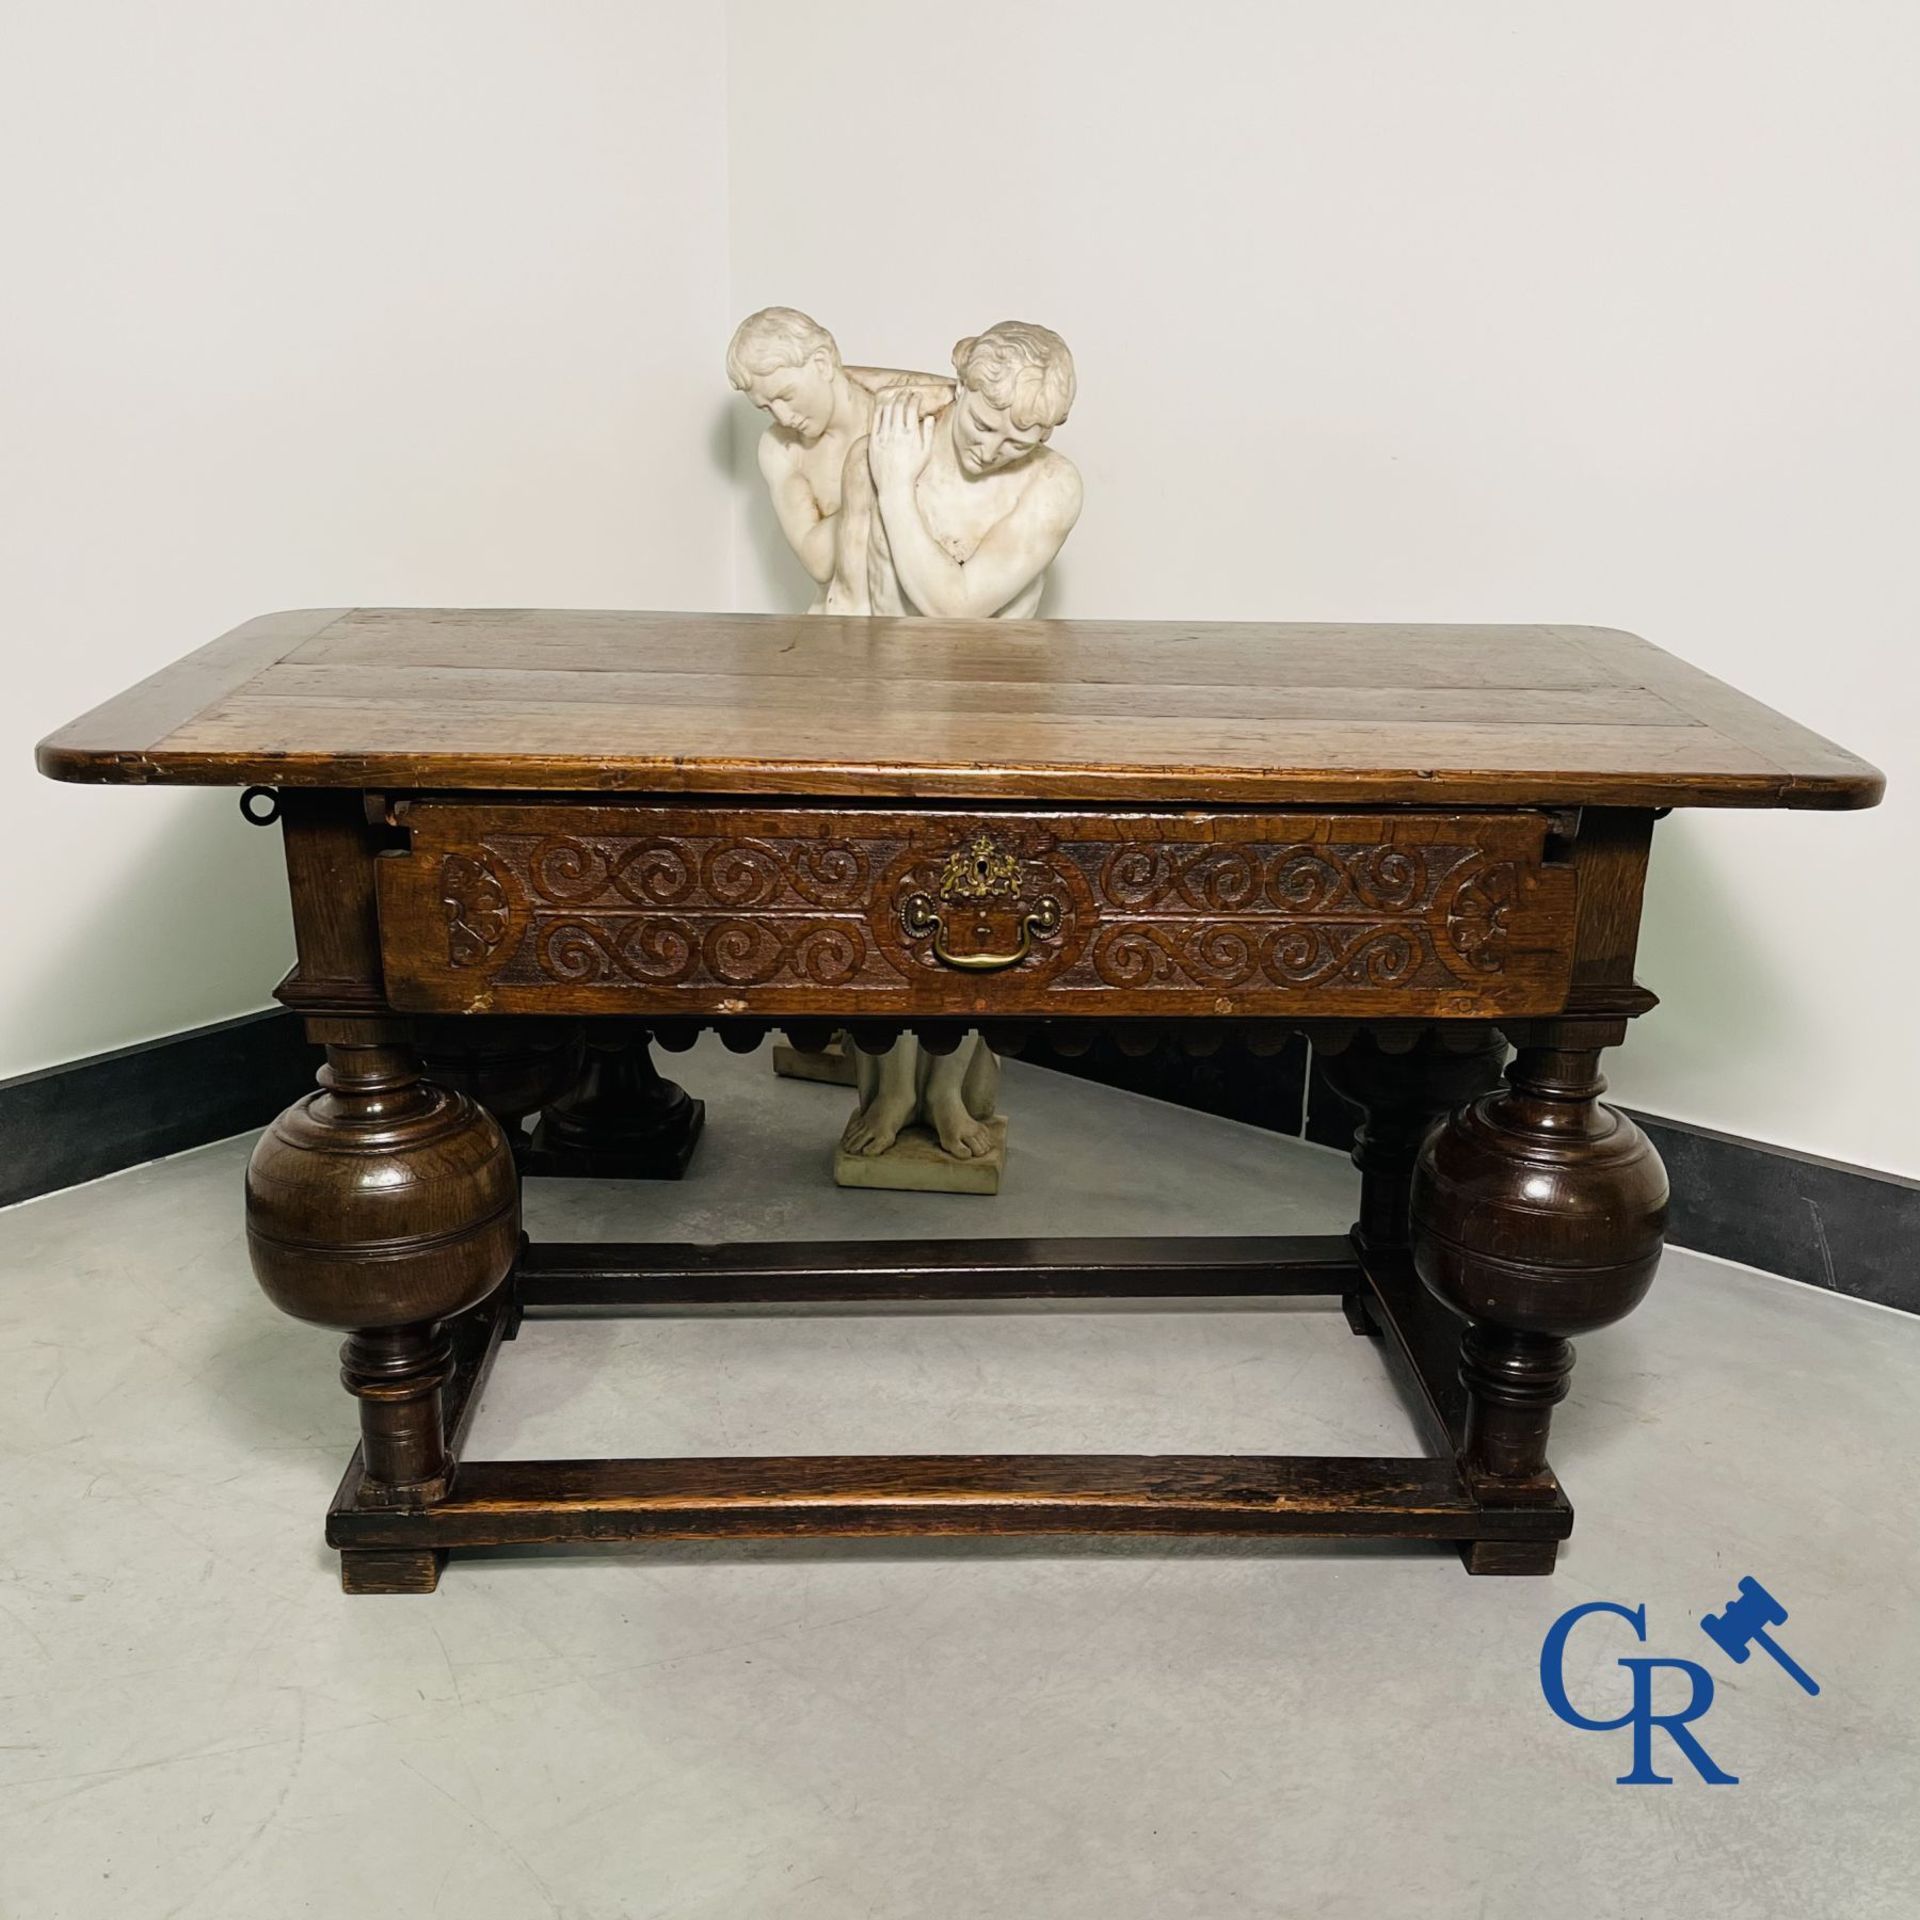 Furniture: An oak table with drawer. 17th - 18th century. - Image 3 of 16